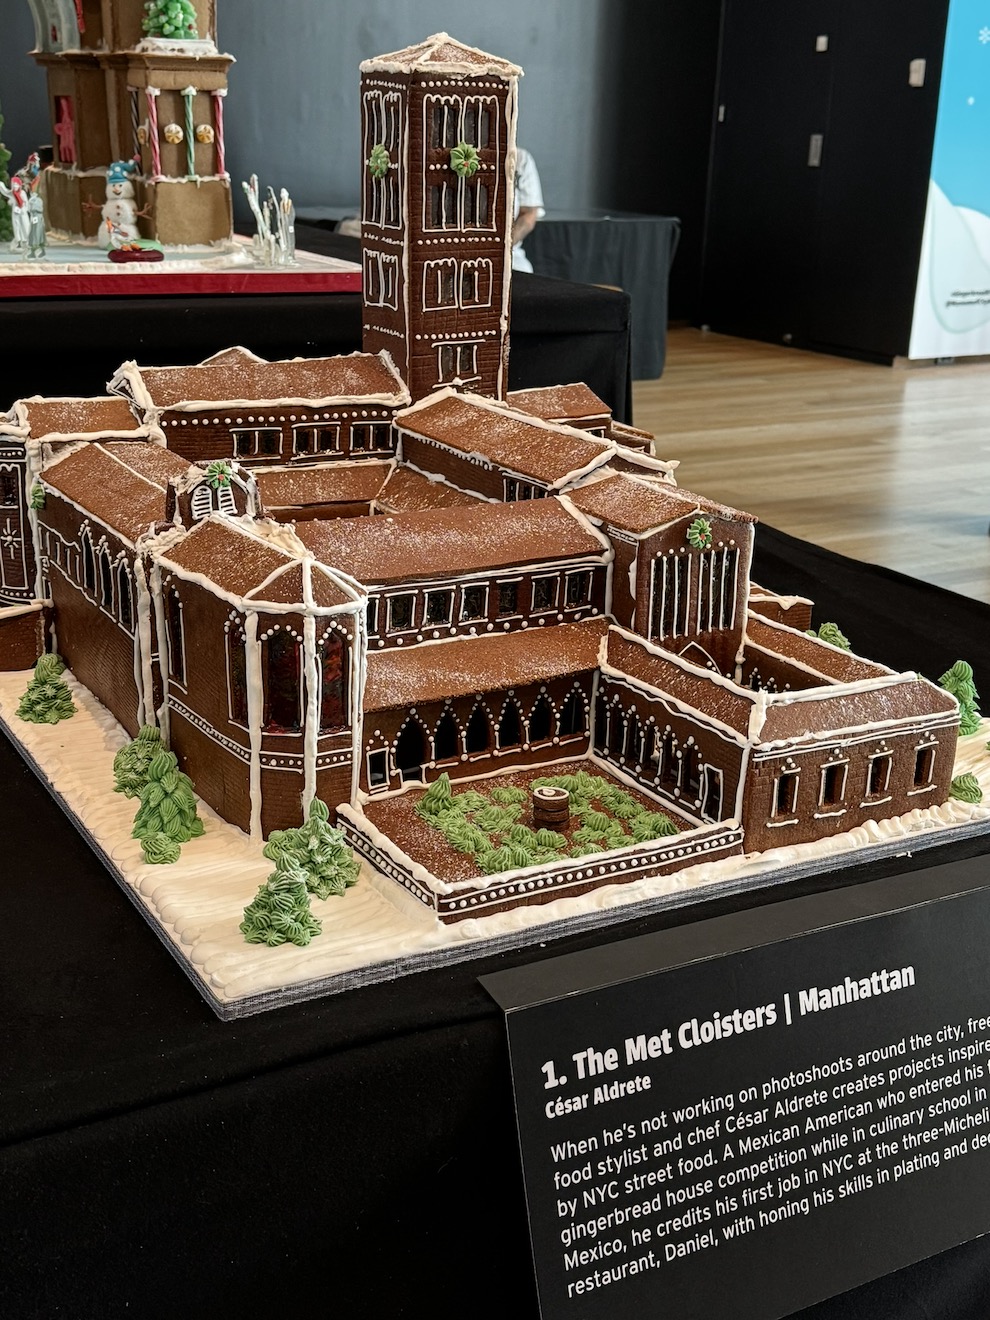 View of the finished display of the Cloisters, one of the entries from the installation "Gingerbread NYC: Great Borough Bake-Off," 2023.